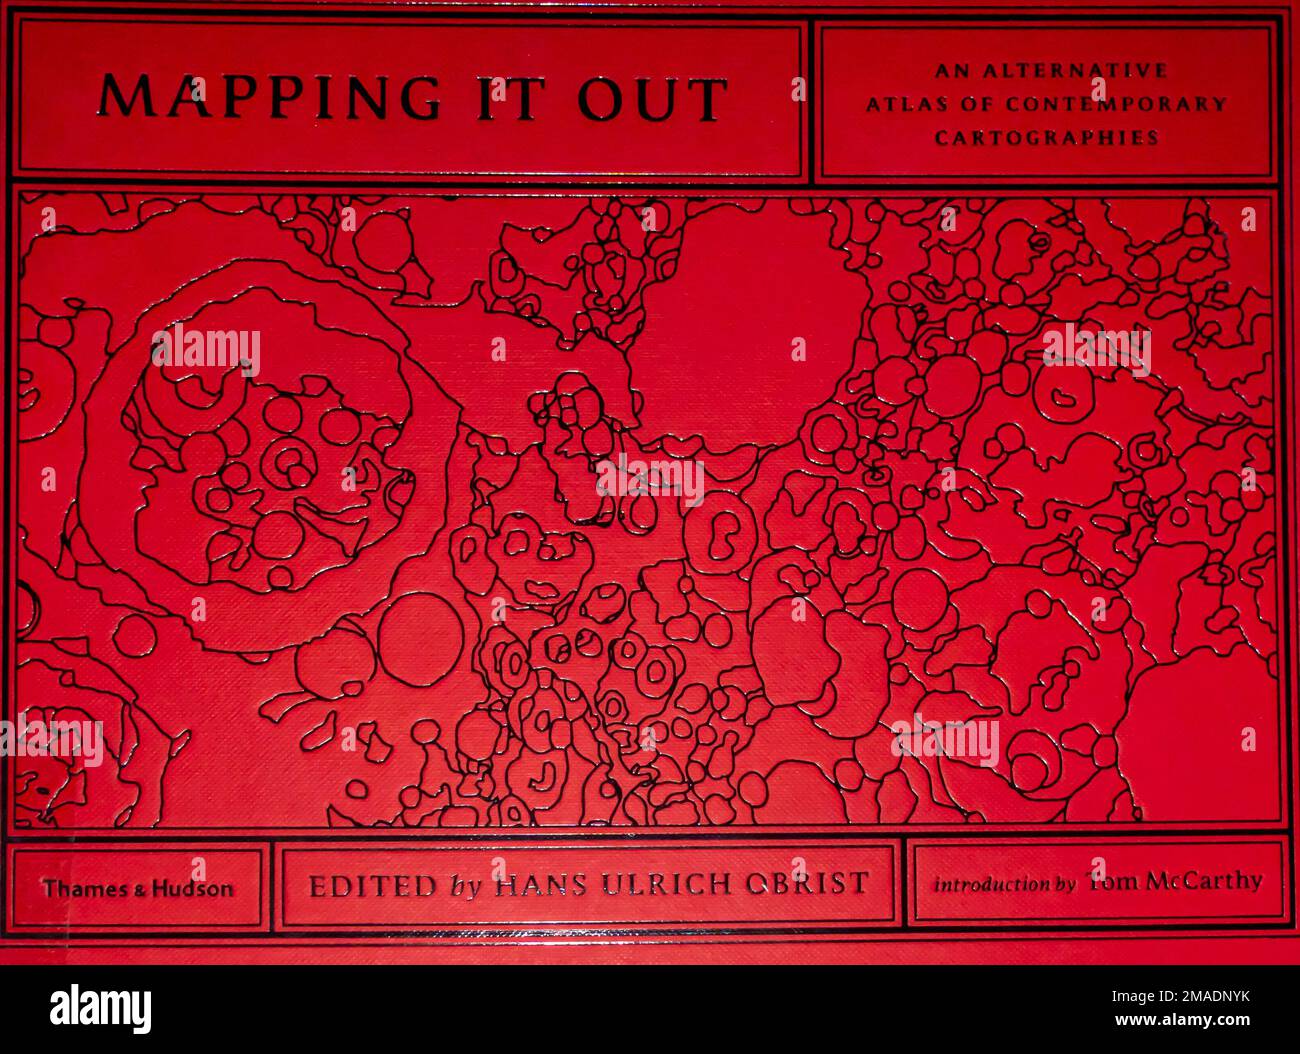 Mapping It Out: An Alternative Atlas Of Contemporary Cartographies Book 2014 Stockfoto